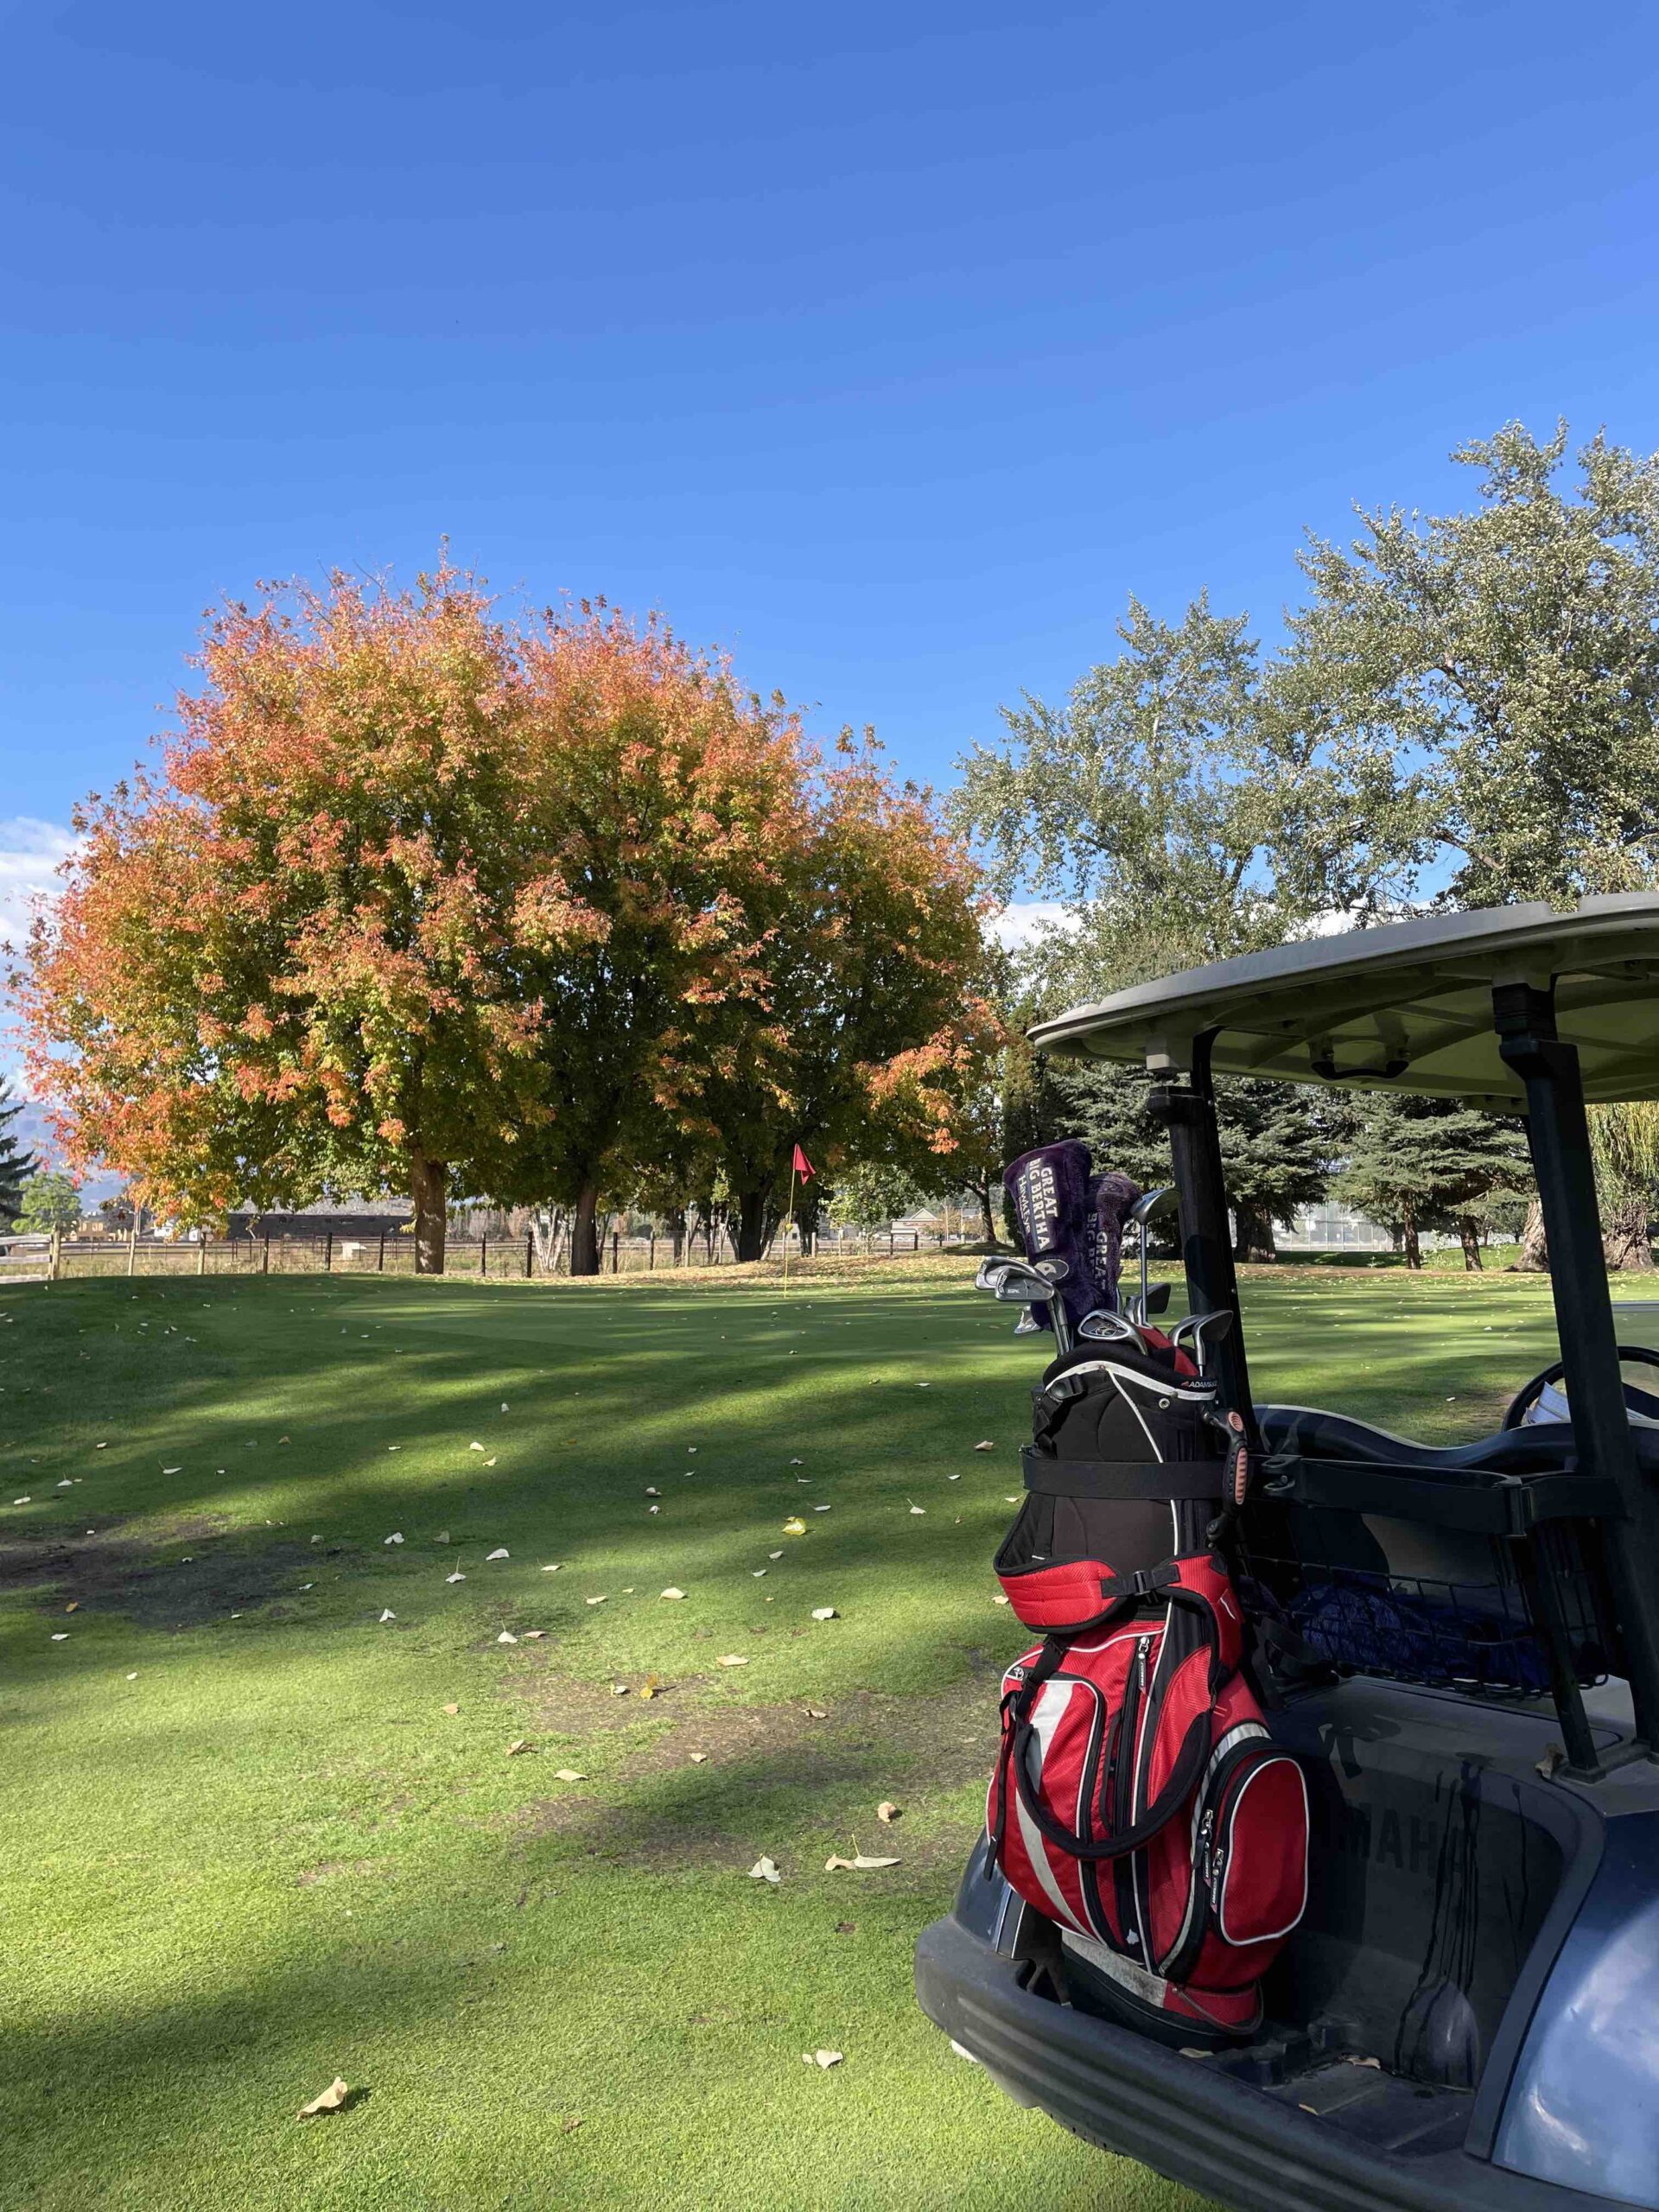 Enjoying a stunning fall day at Mission Creek Golf Course